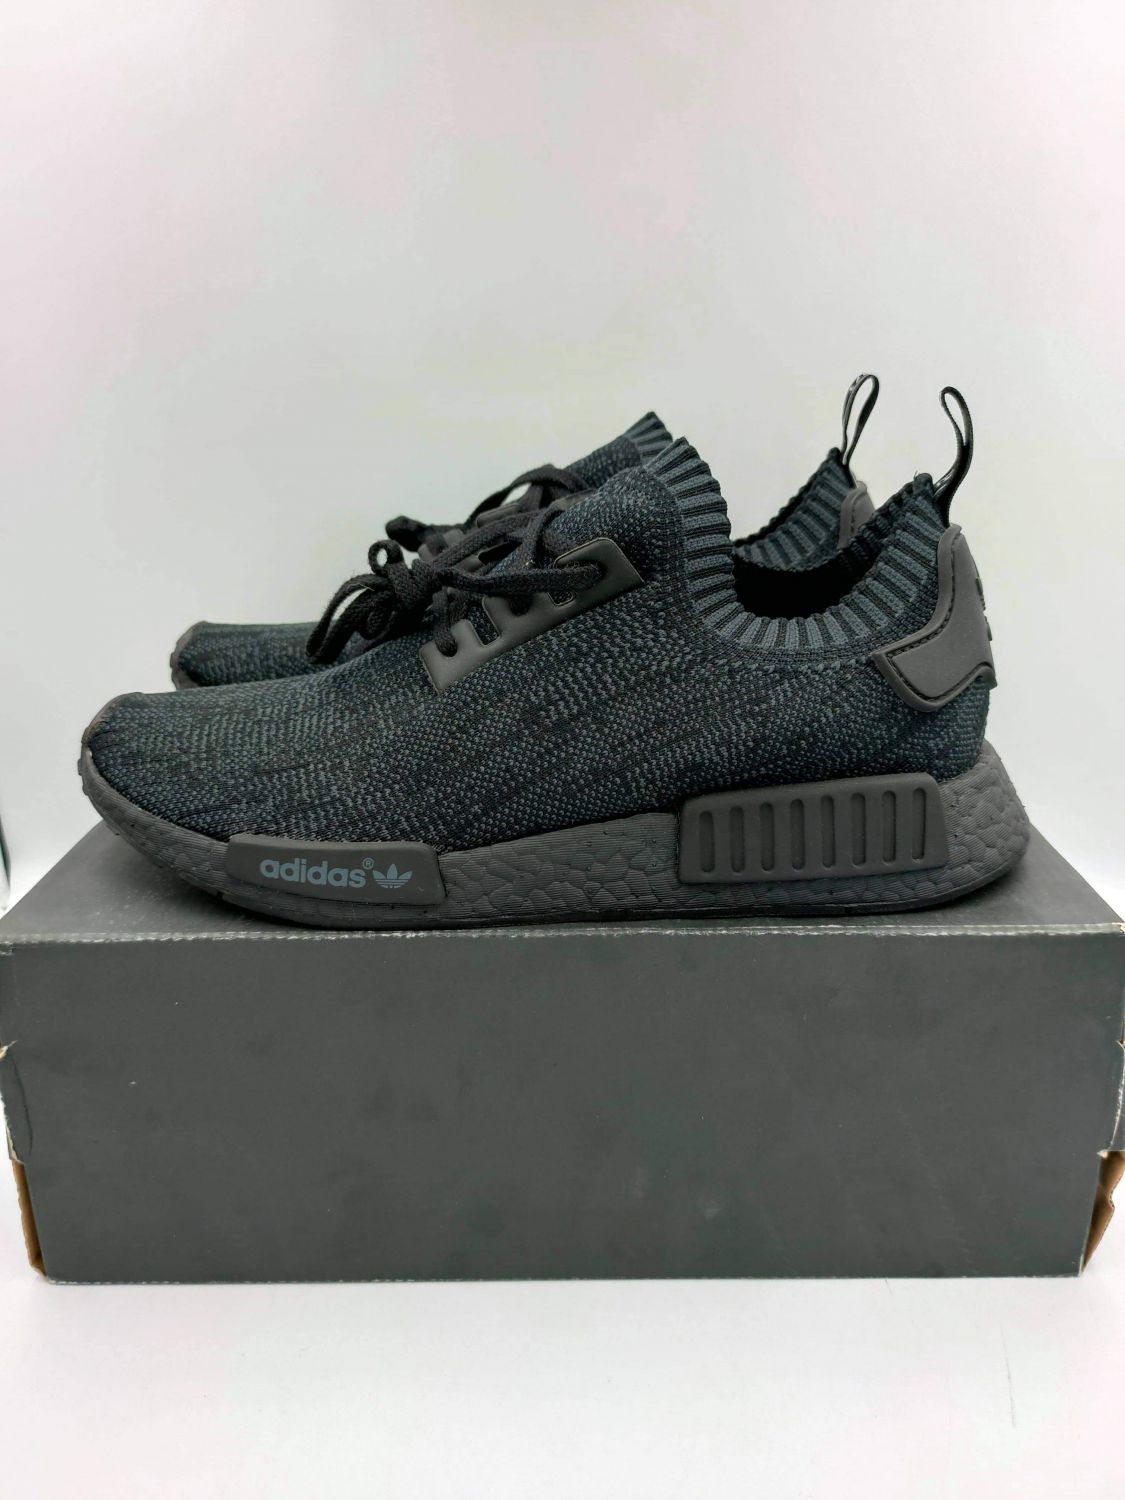 Adidas NMD R1 Friends Pitch Black | AfterMarket